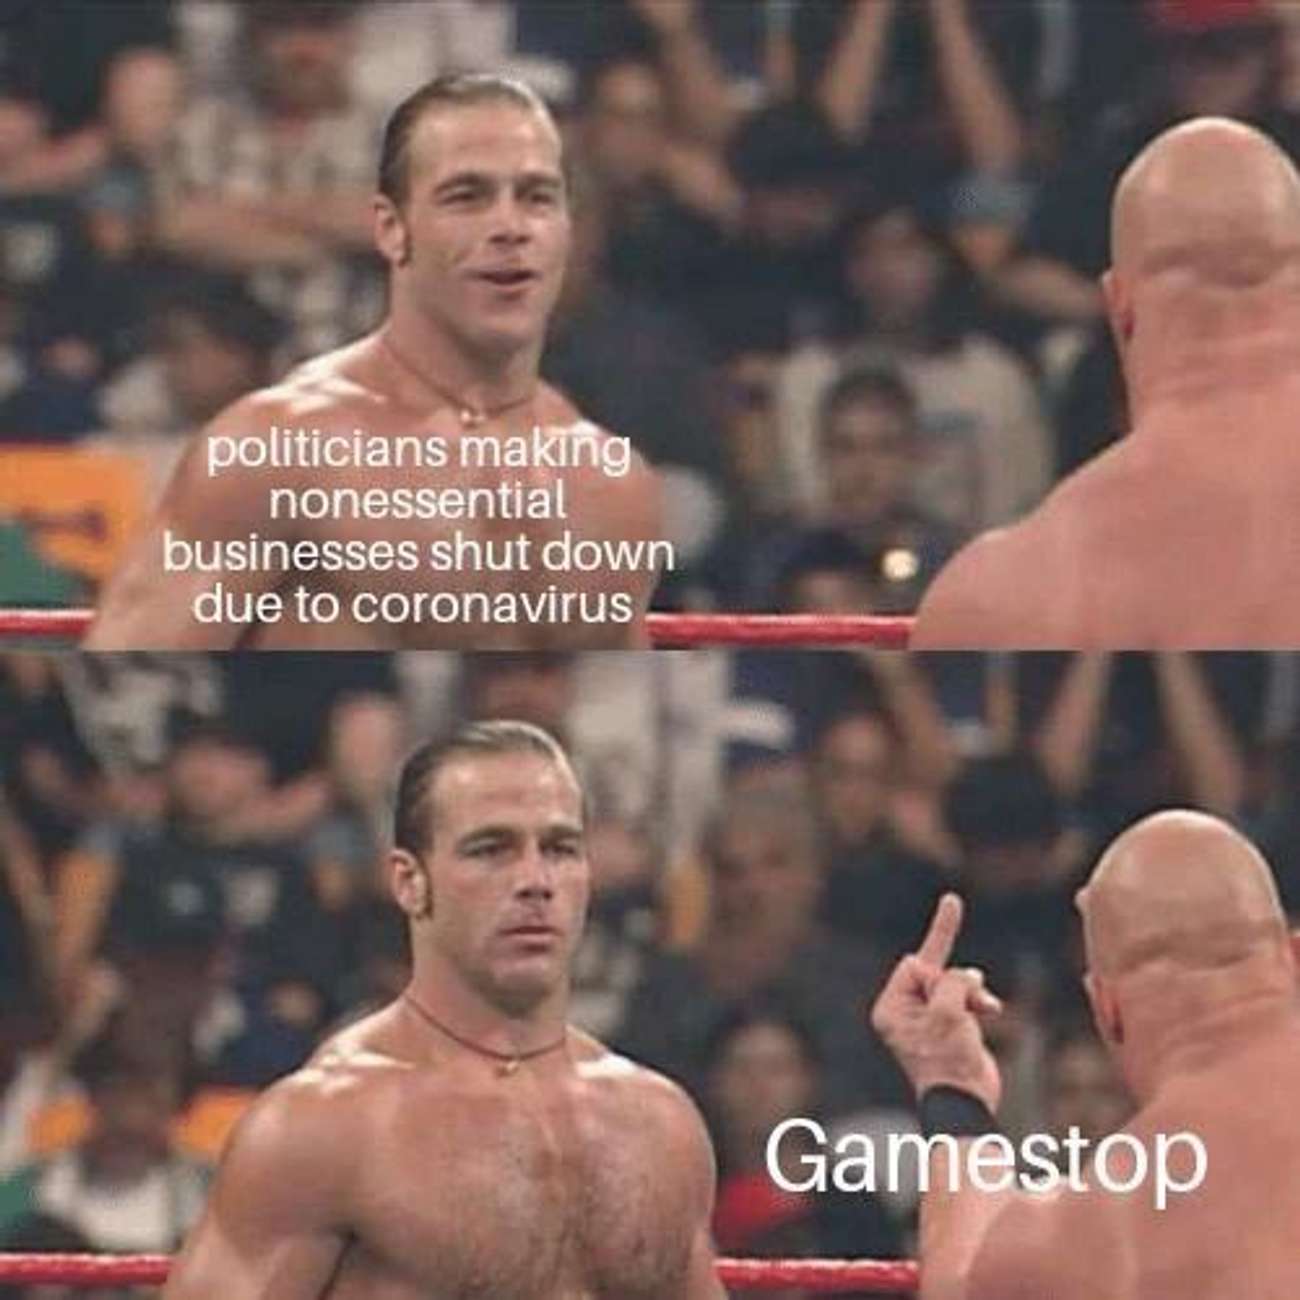 shawn michaels middle finger - politicians making nonessential businesses shut down due to coronavirus Gamestop